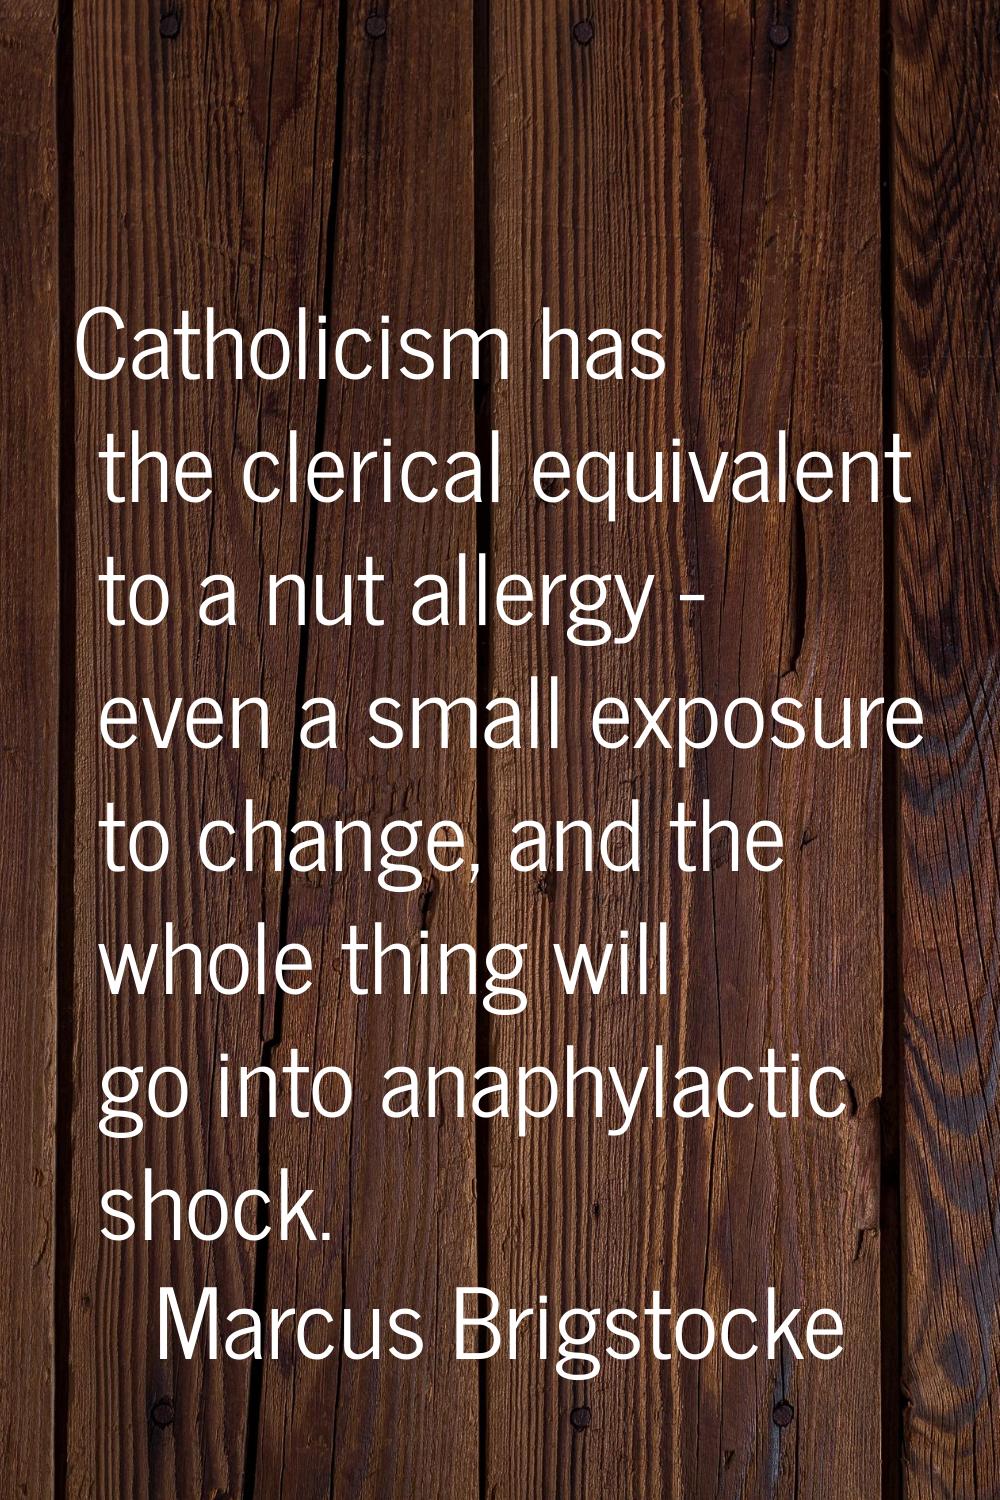 Catholicism has the clerical equivalent to a nut allergy - even a small exposure to change, and the